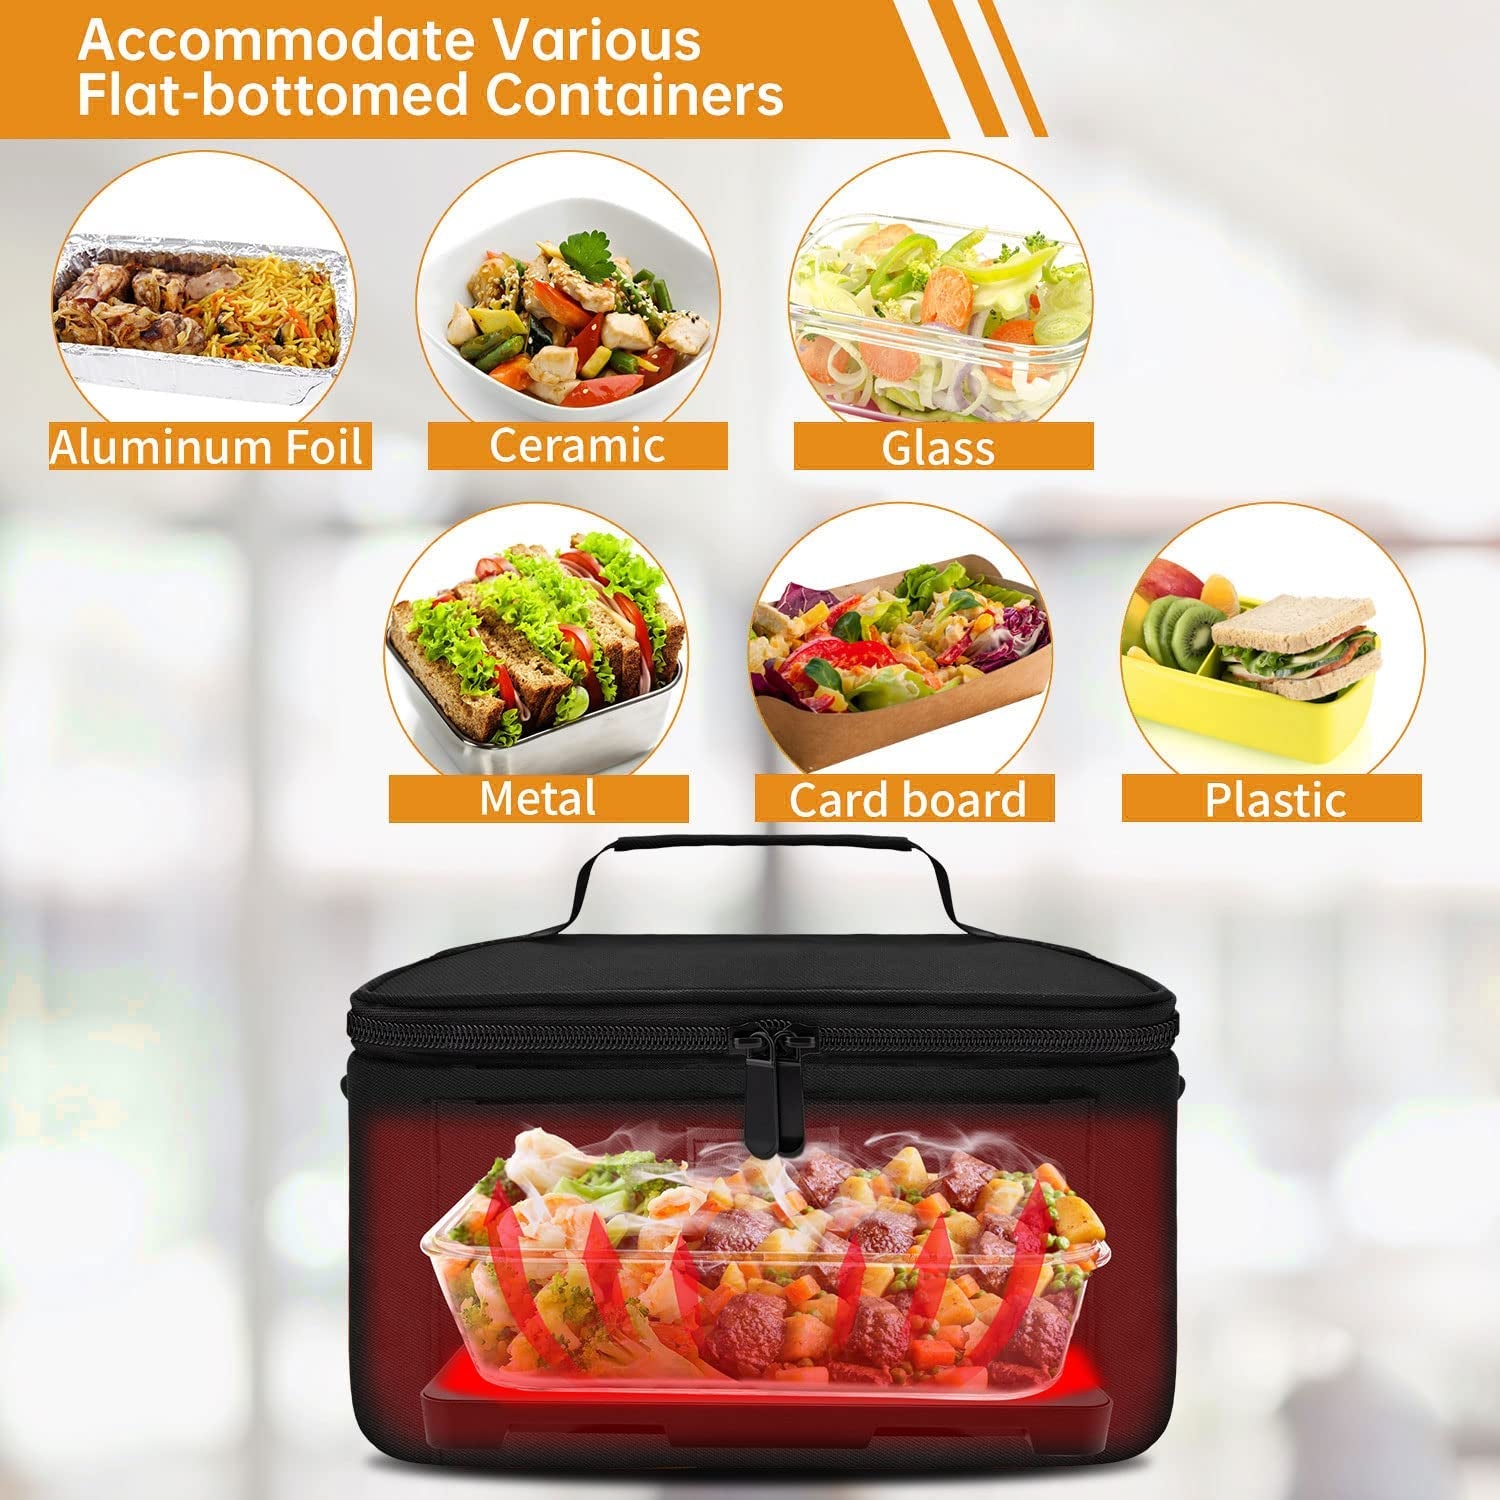 Portable Oven | 12V, 24V, 110V Food Warmer | Portable Mini Personal Microwave | Heated Lunch Box for Cooking and Reheating Food in Car, Truck, Travel, Camping, Work, Home |